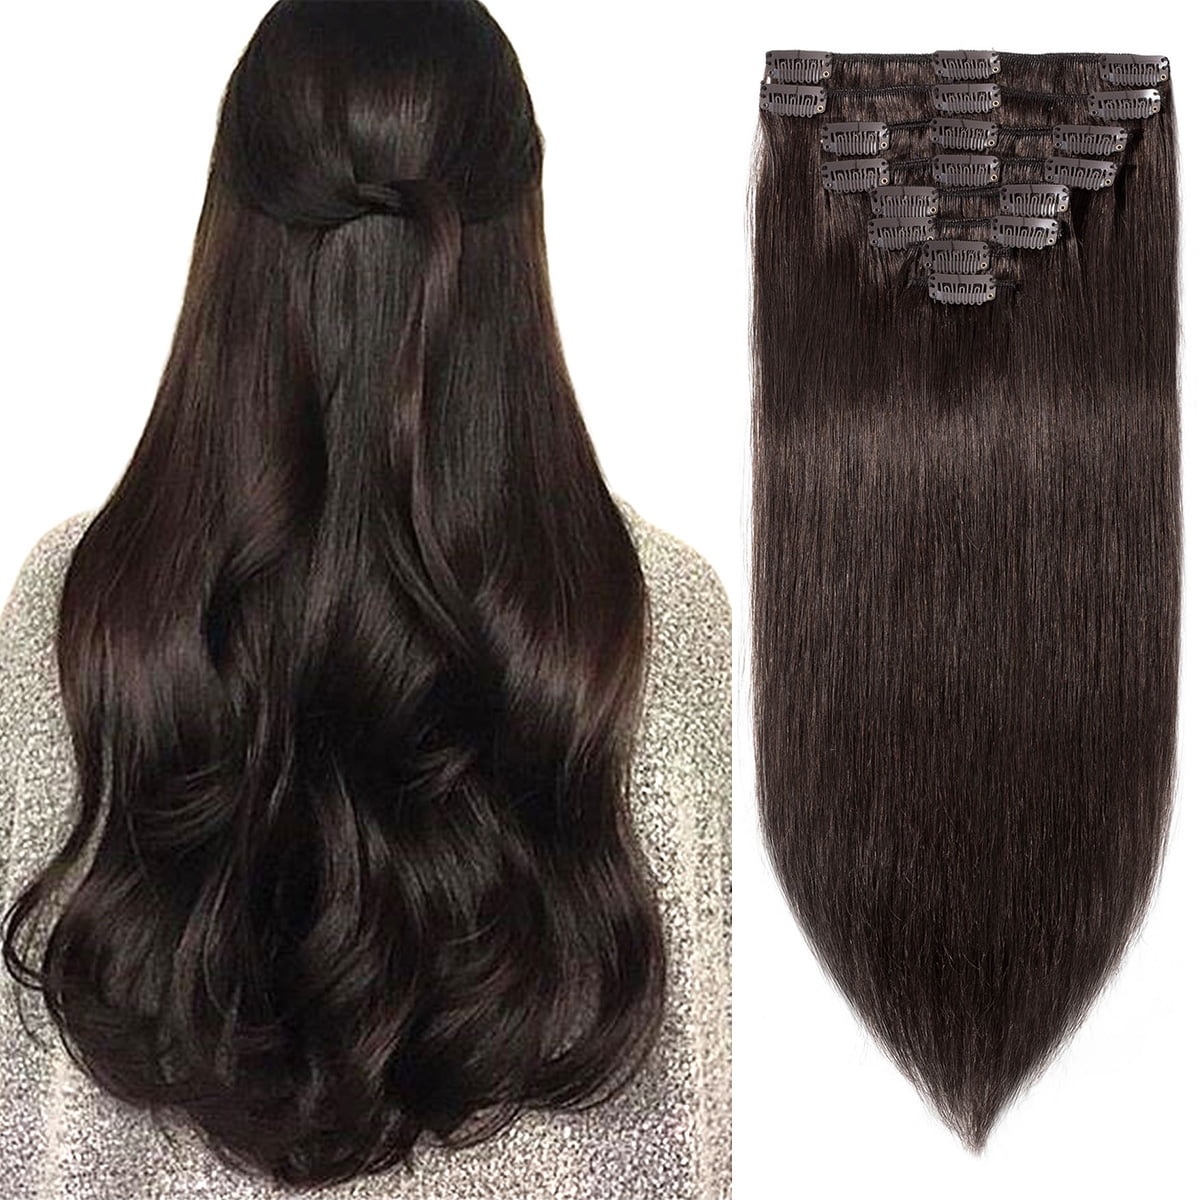 8 hair extensions